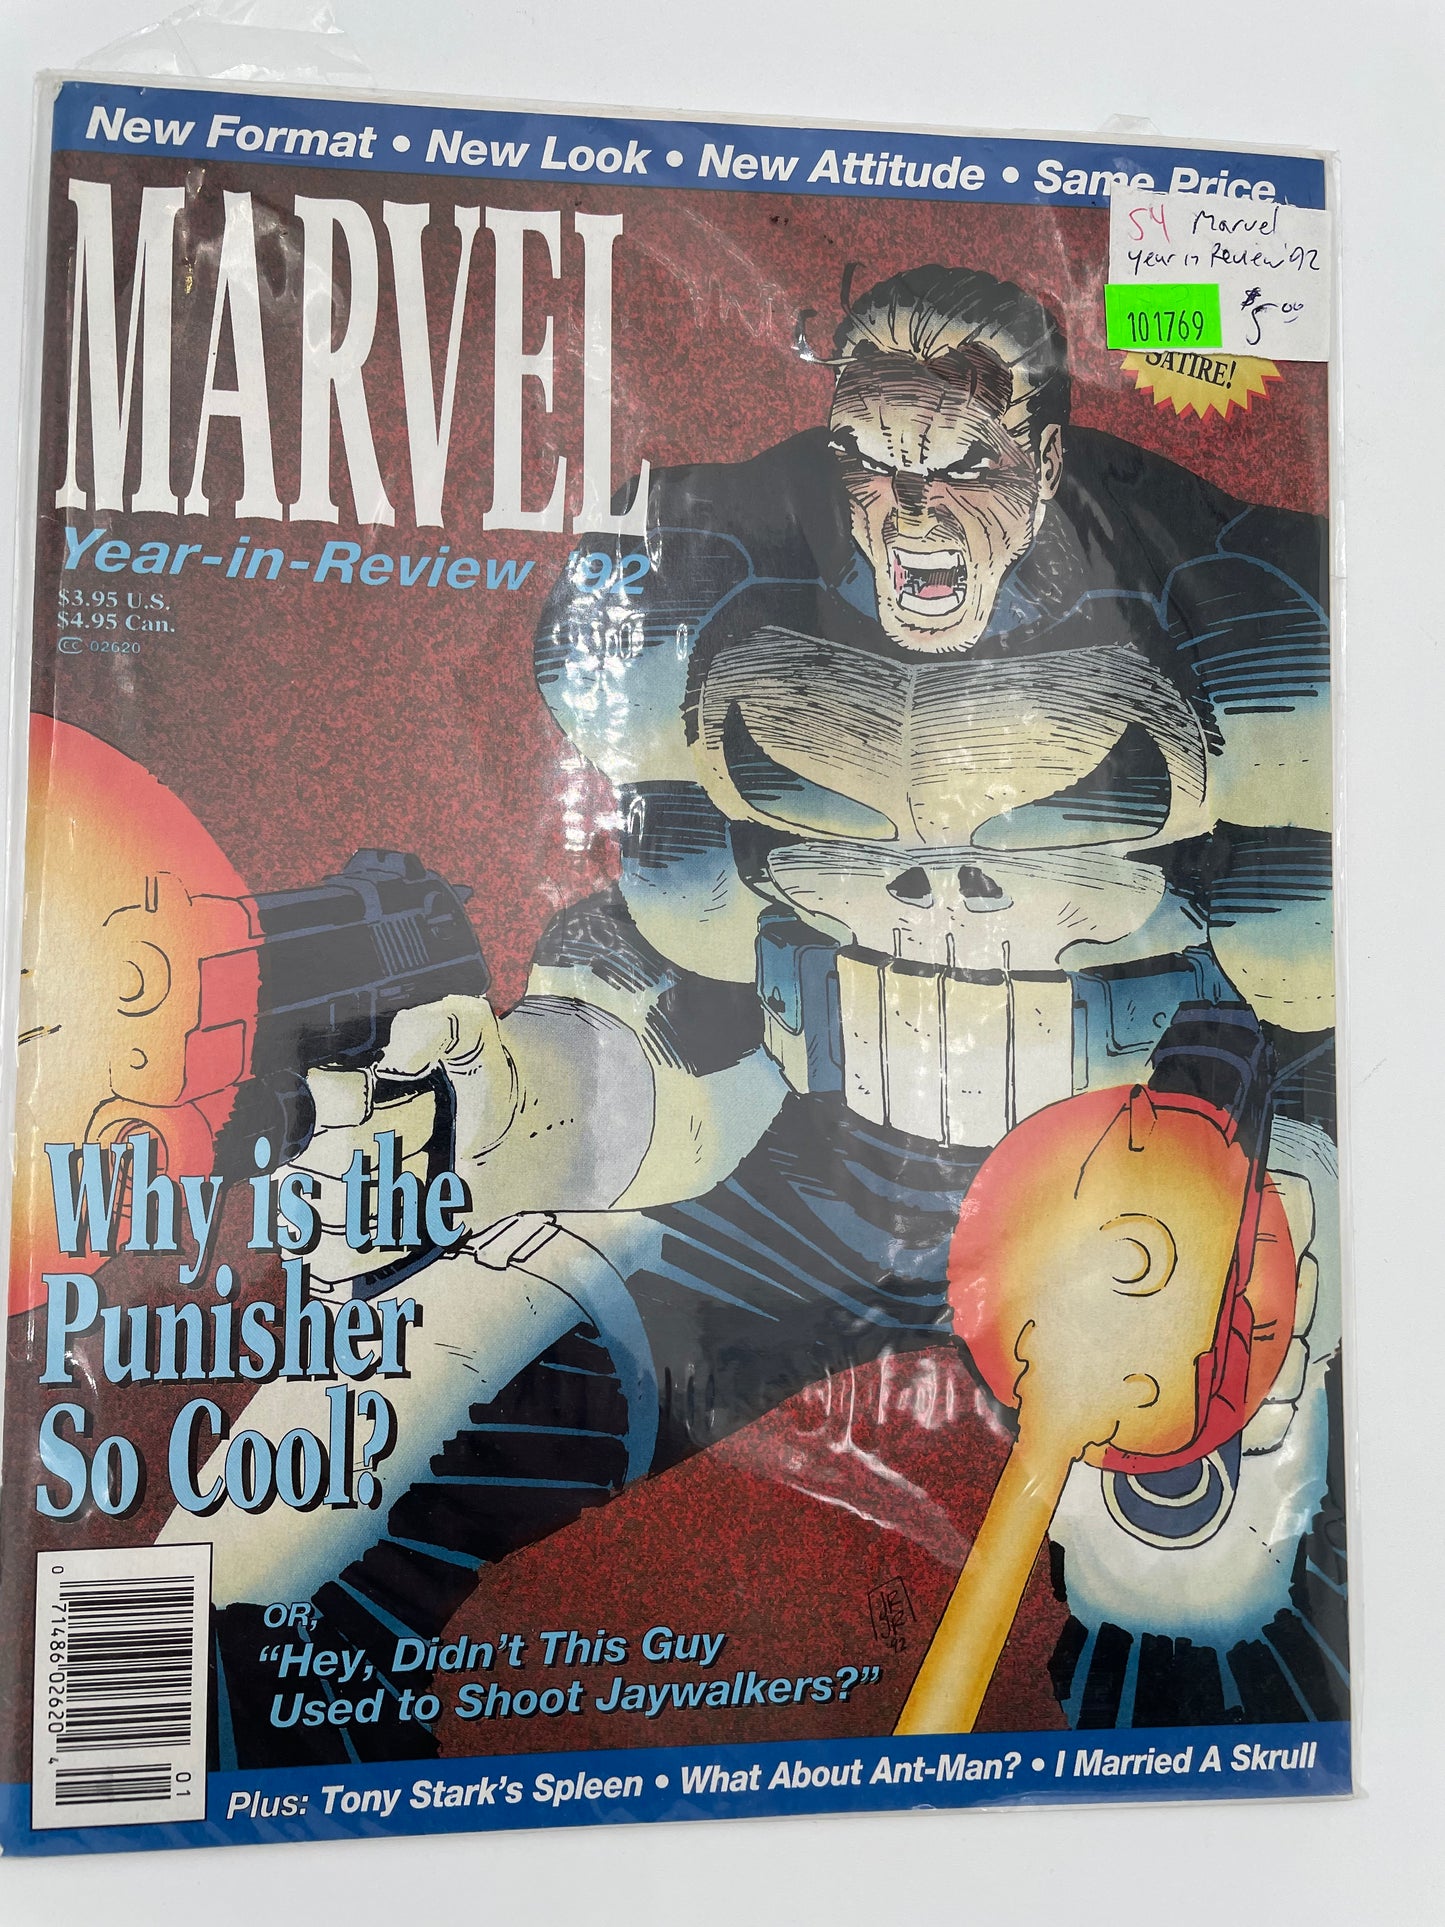 Marvel Year in Review ‘92 #101769